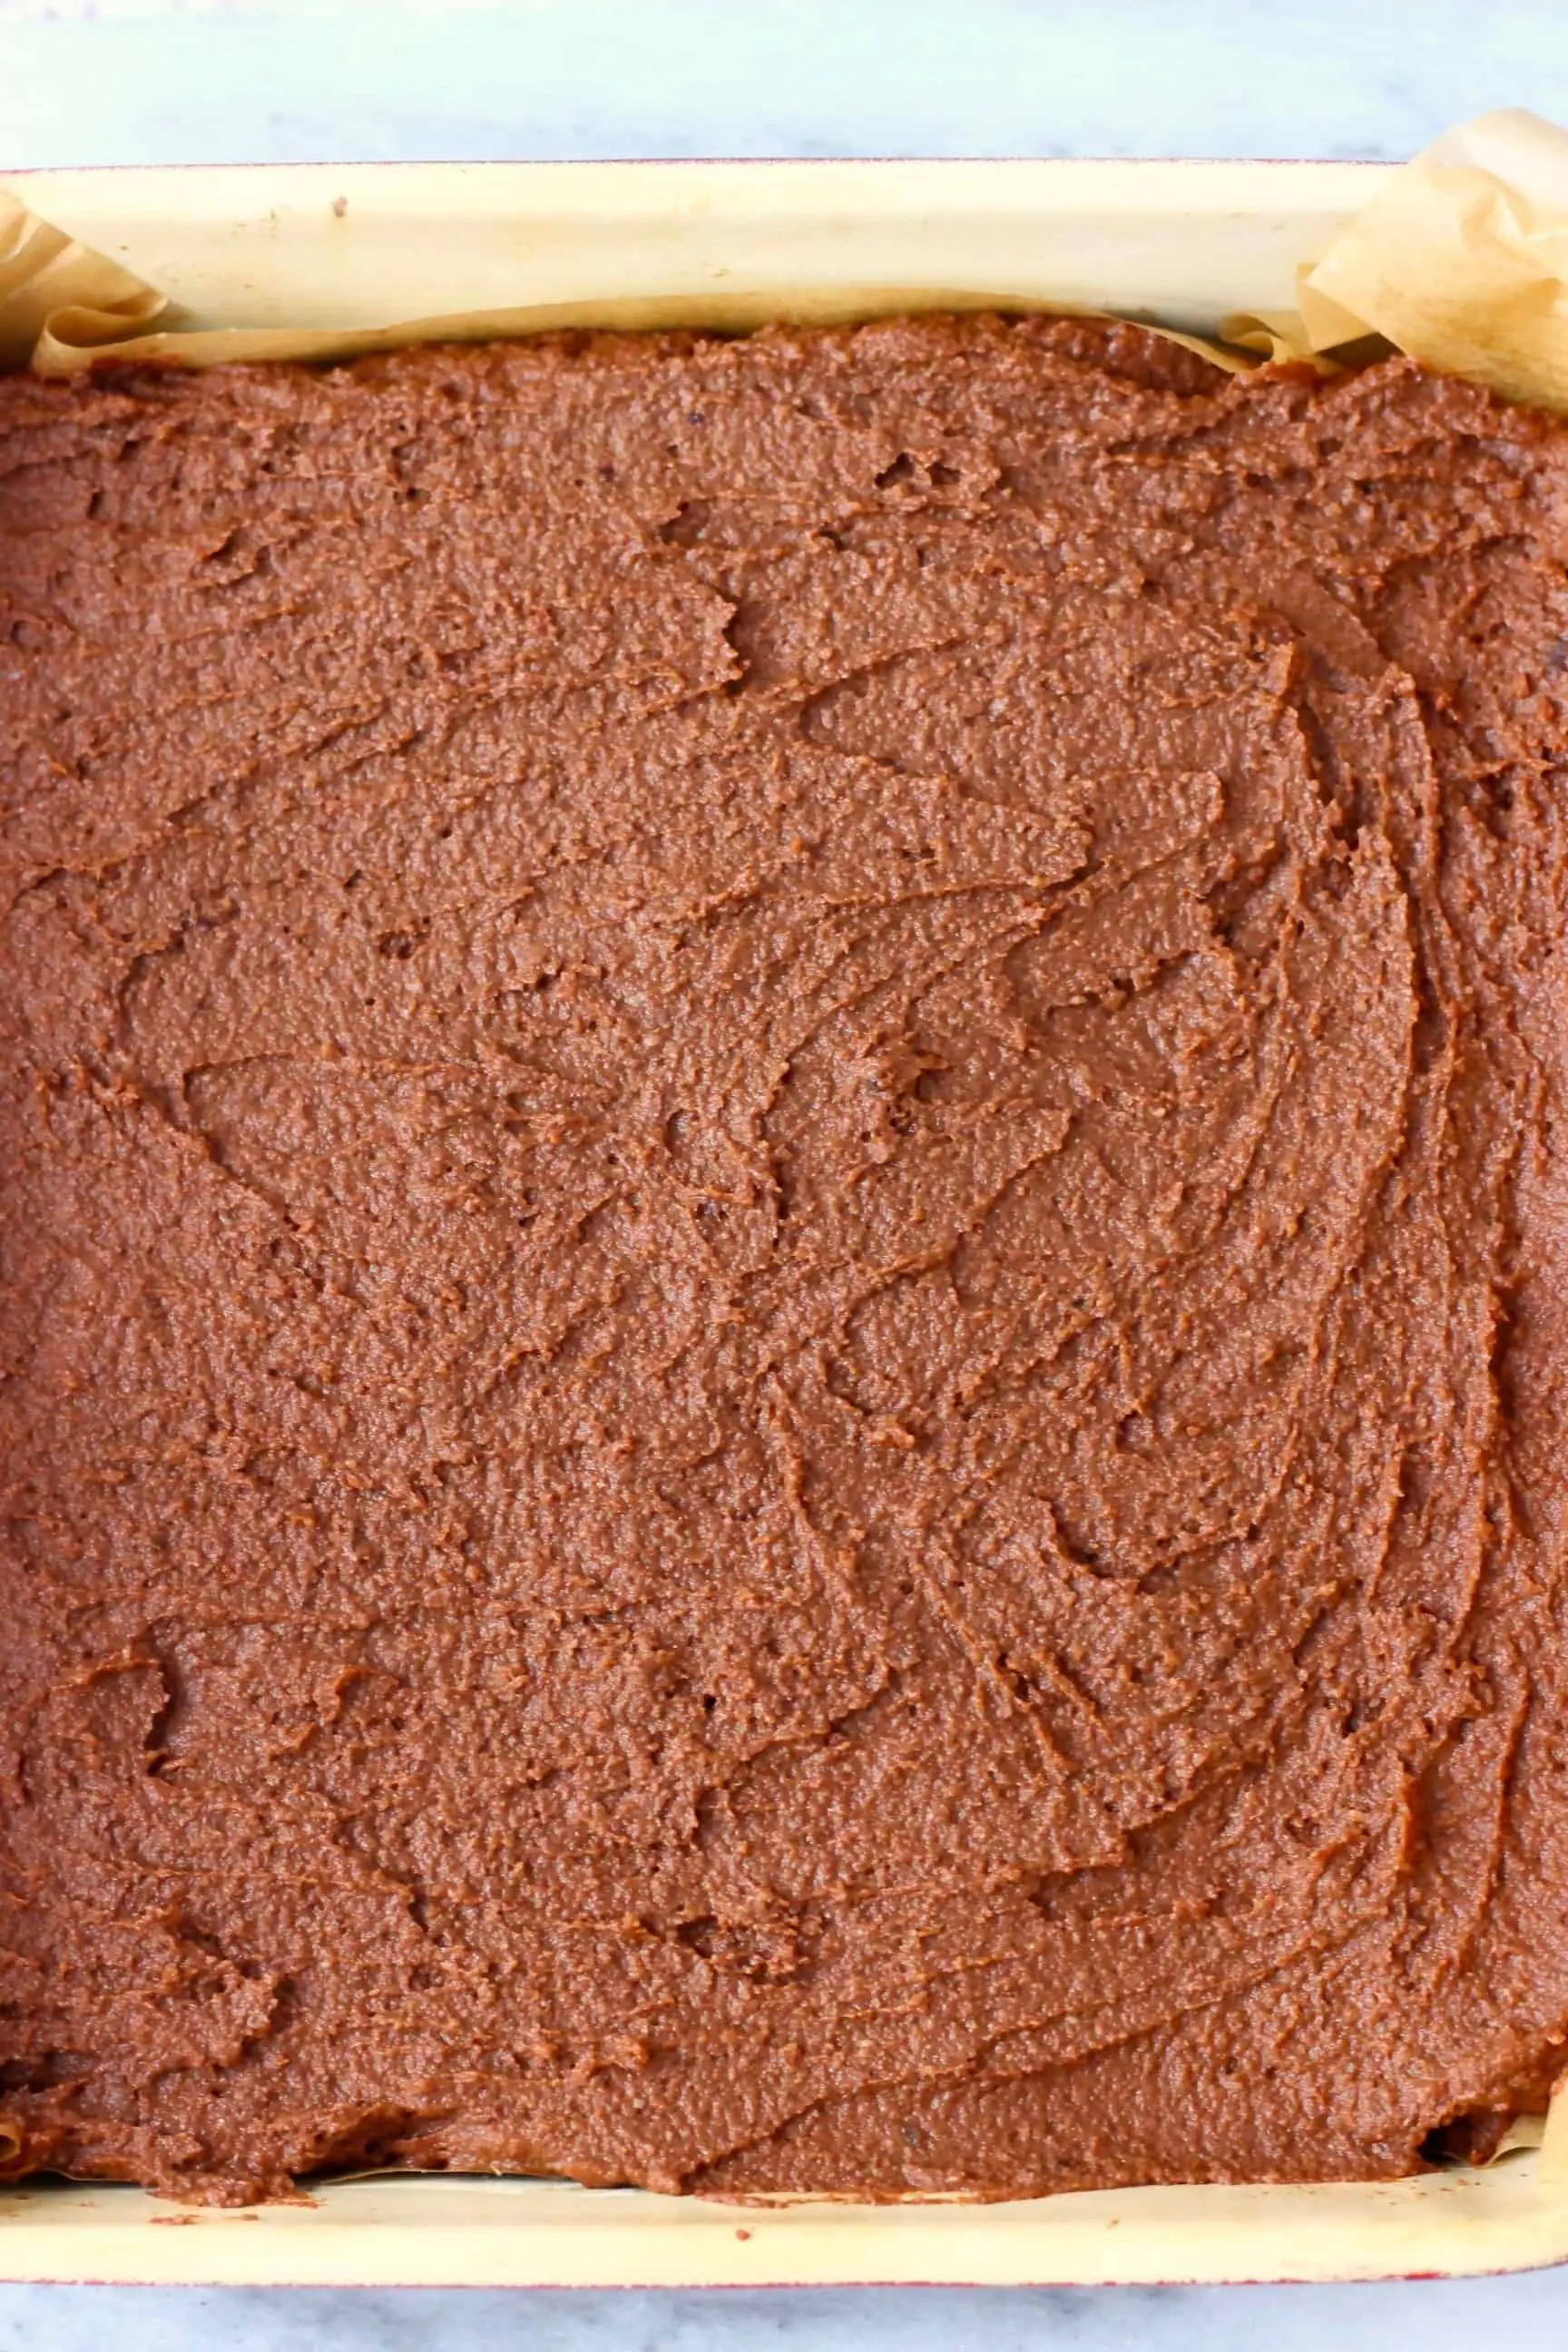 Raw sweet potato brownie batter in a baking tin lined with baking paper